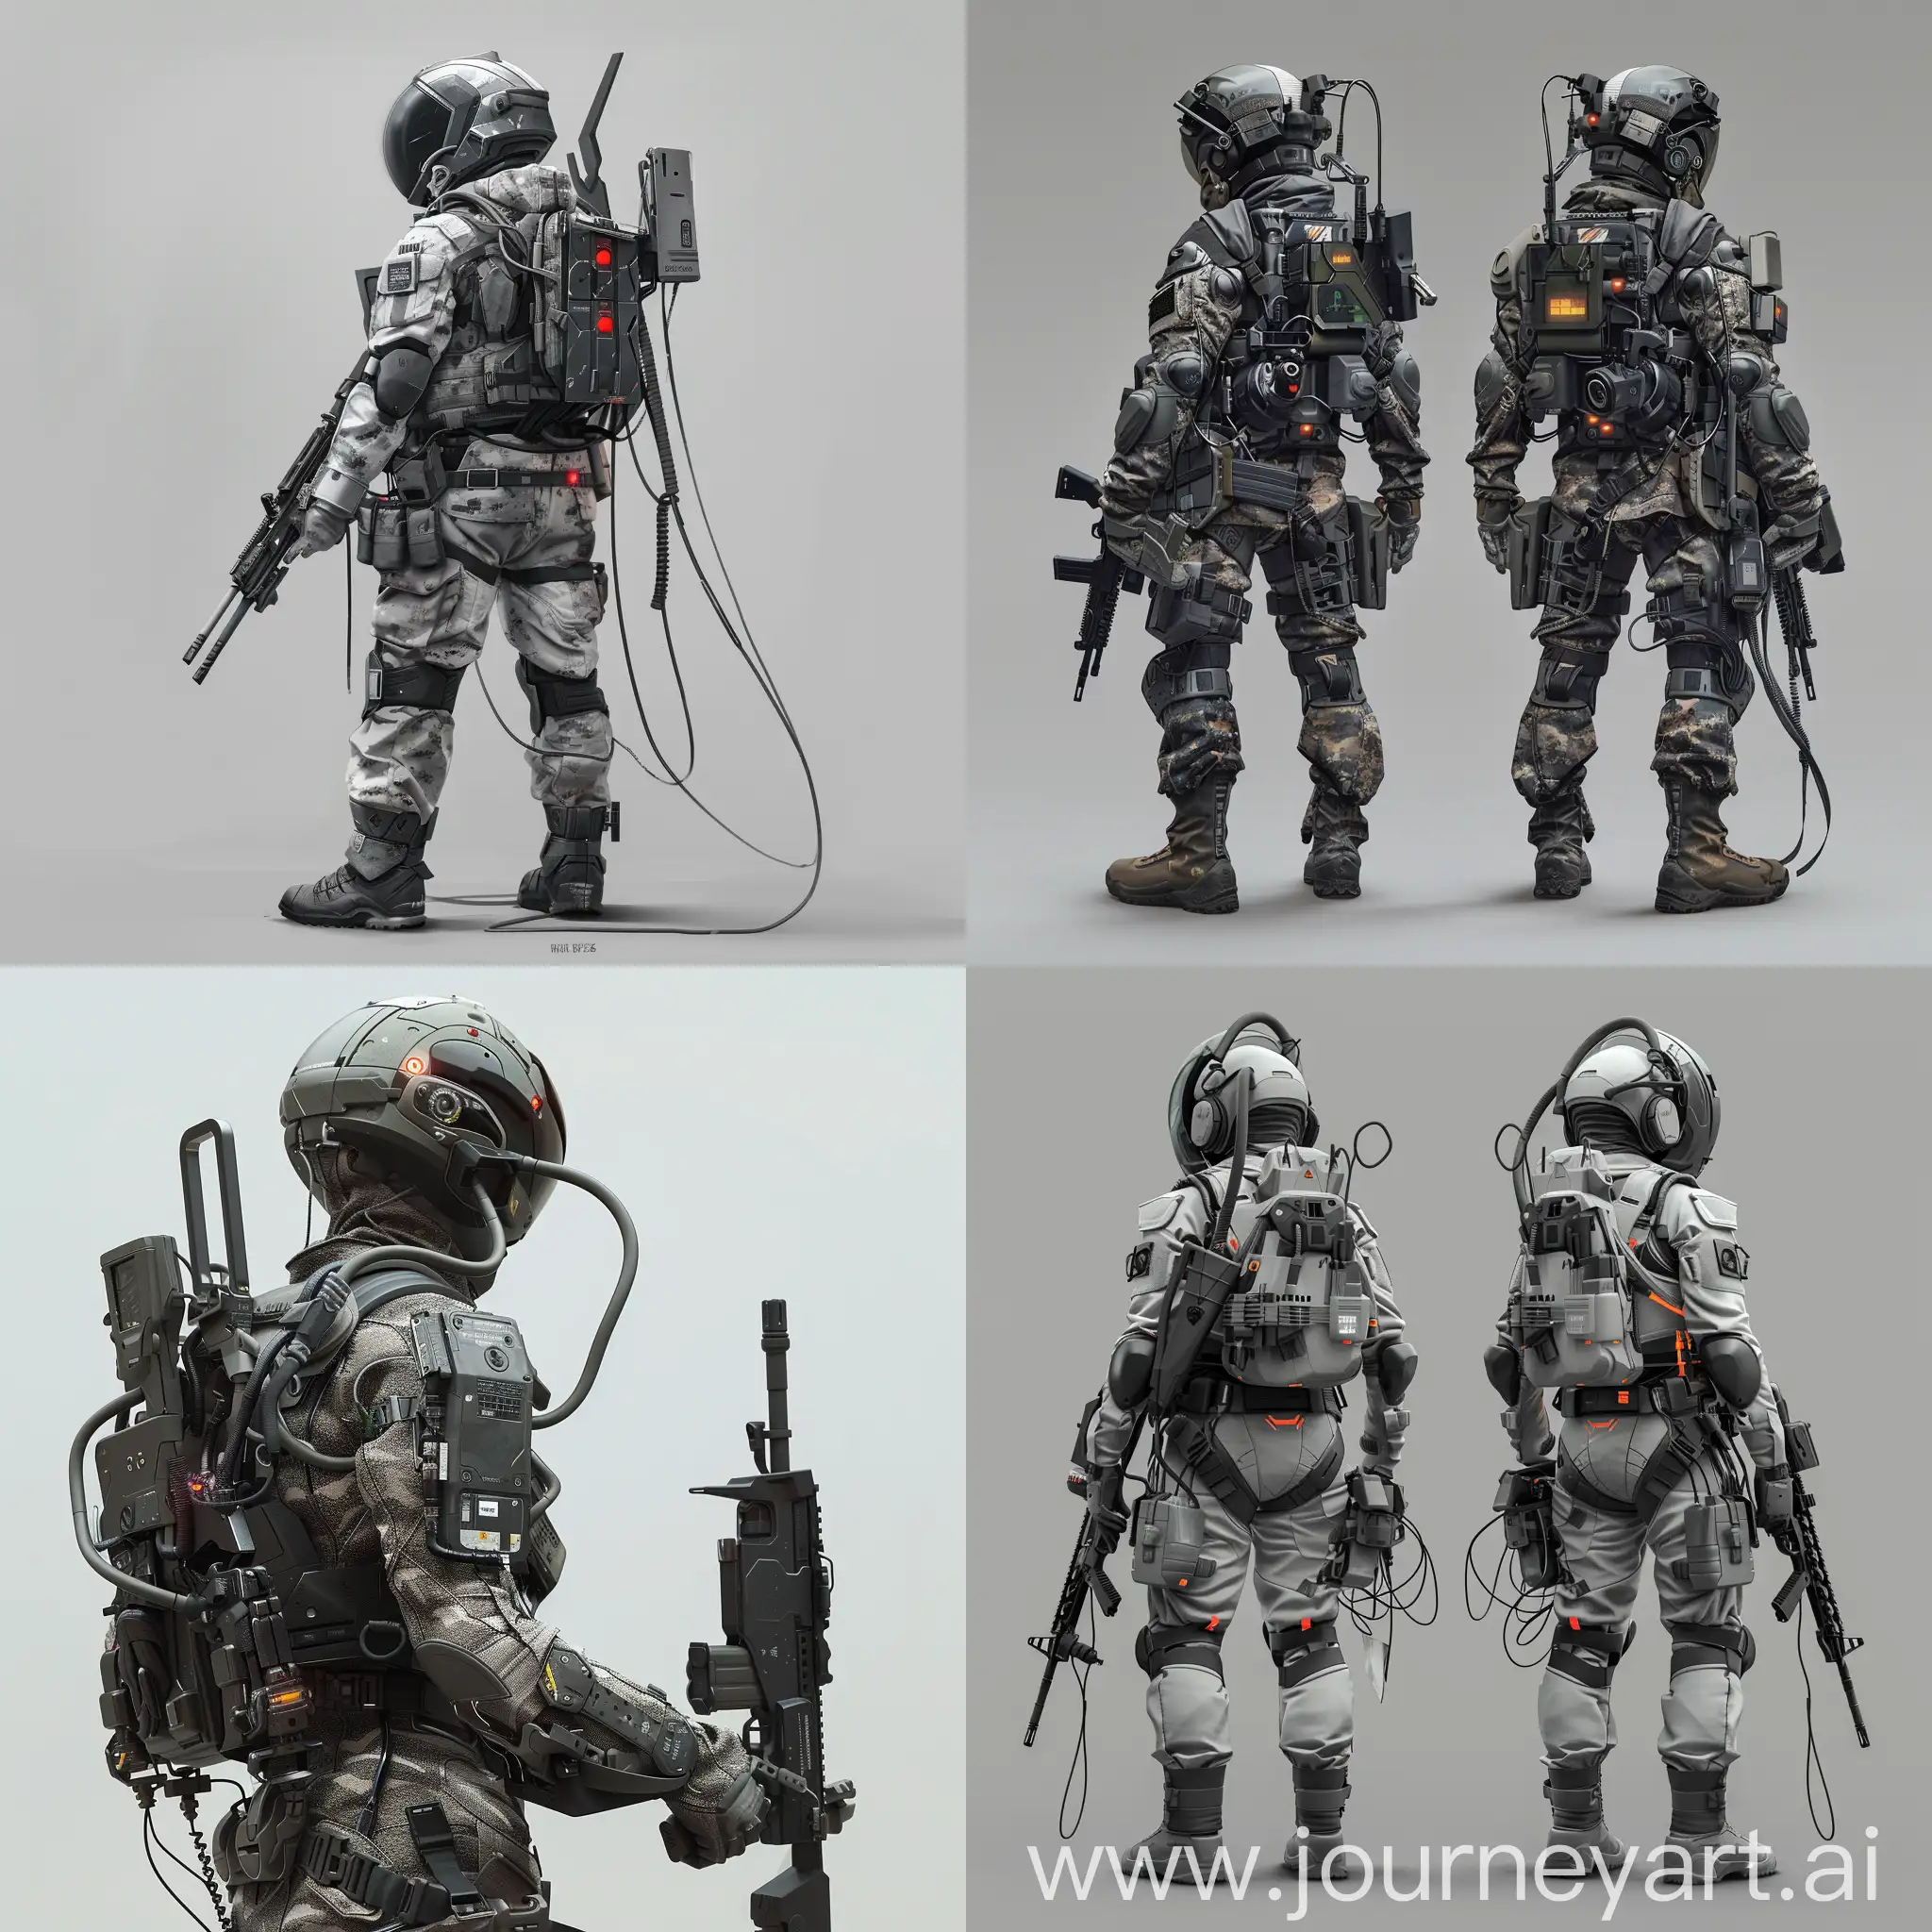 Futuristic-Lightly-Equipped-Soldier-with-Integrated-Communications-and-Power-Supply